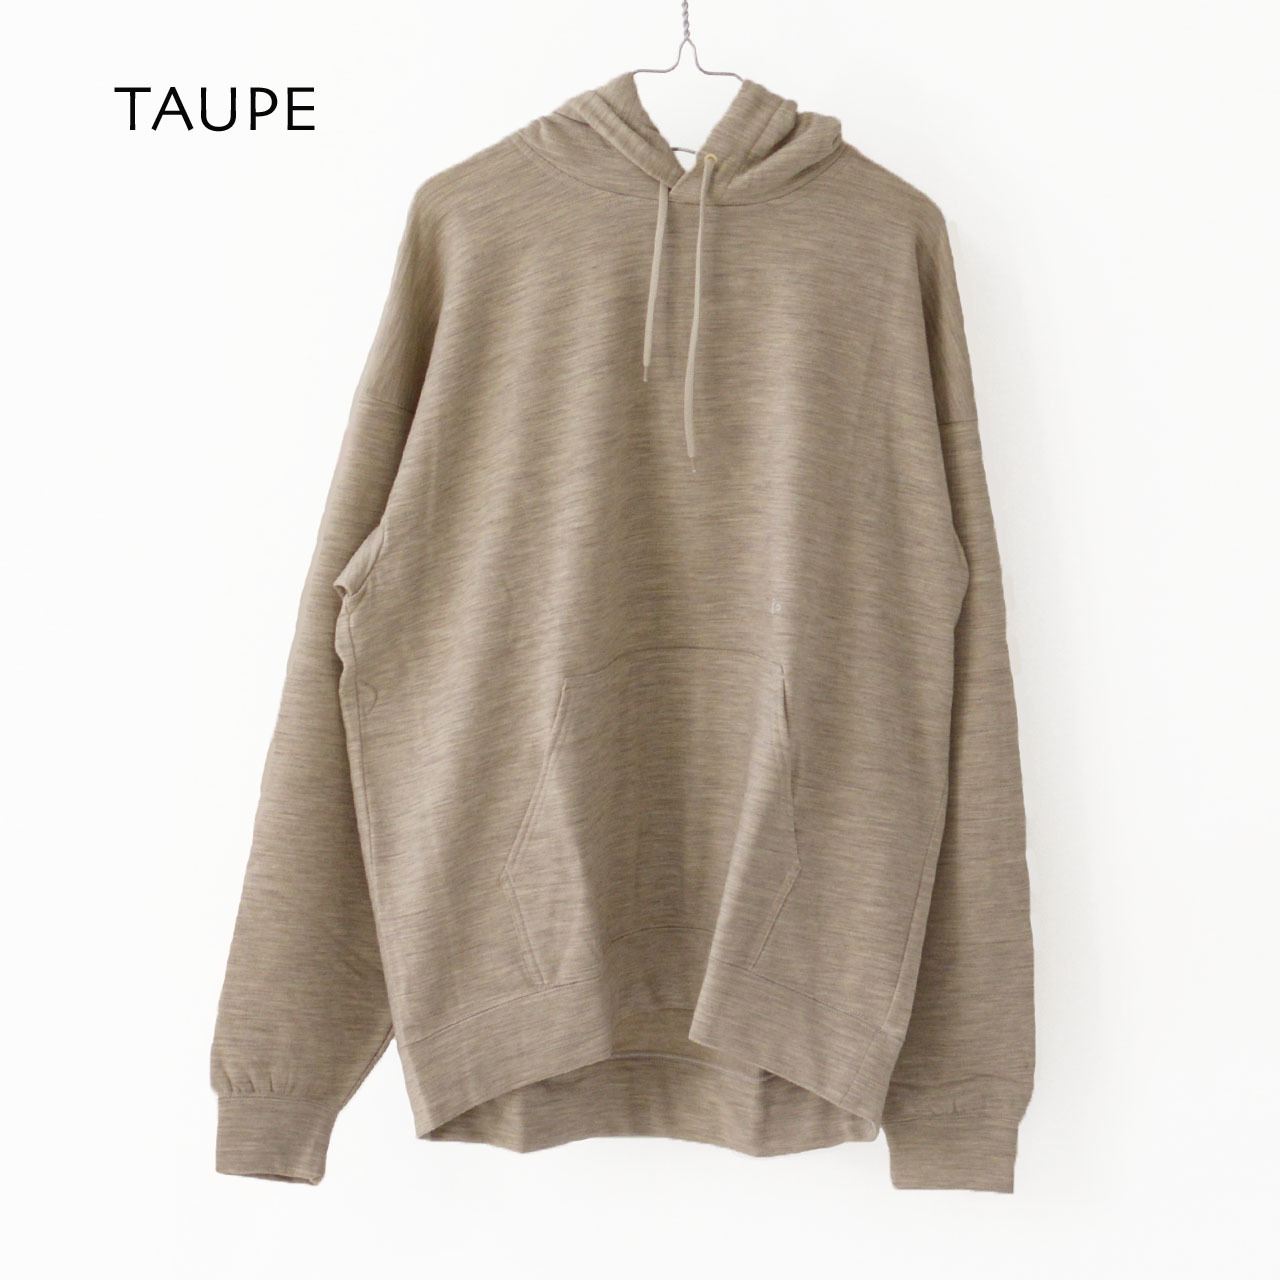 Gymphlex [ジムフレックス] WOOL STRETCH INLEY PULLOVER PARKER [GY-C0022 WIS]_f0051306_14010407.jpg